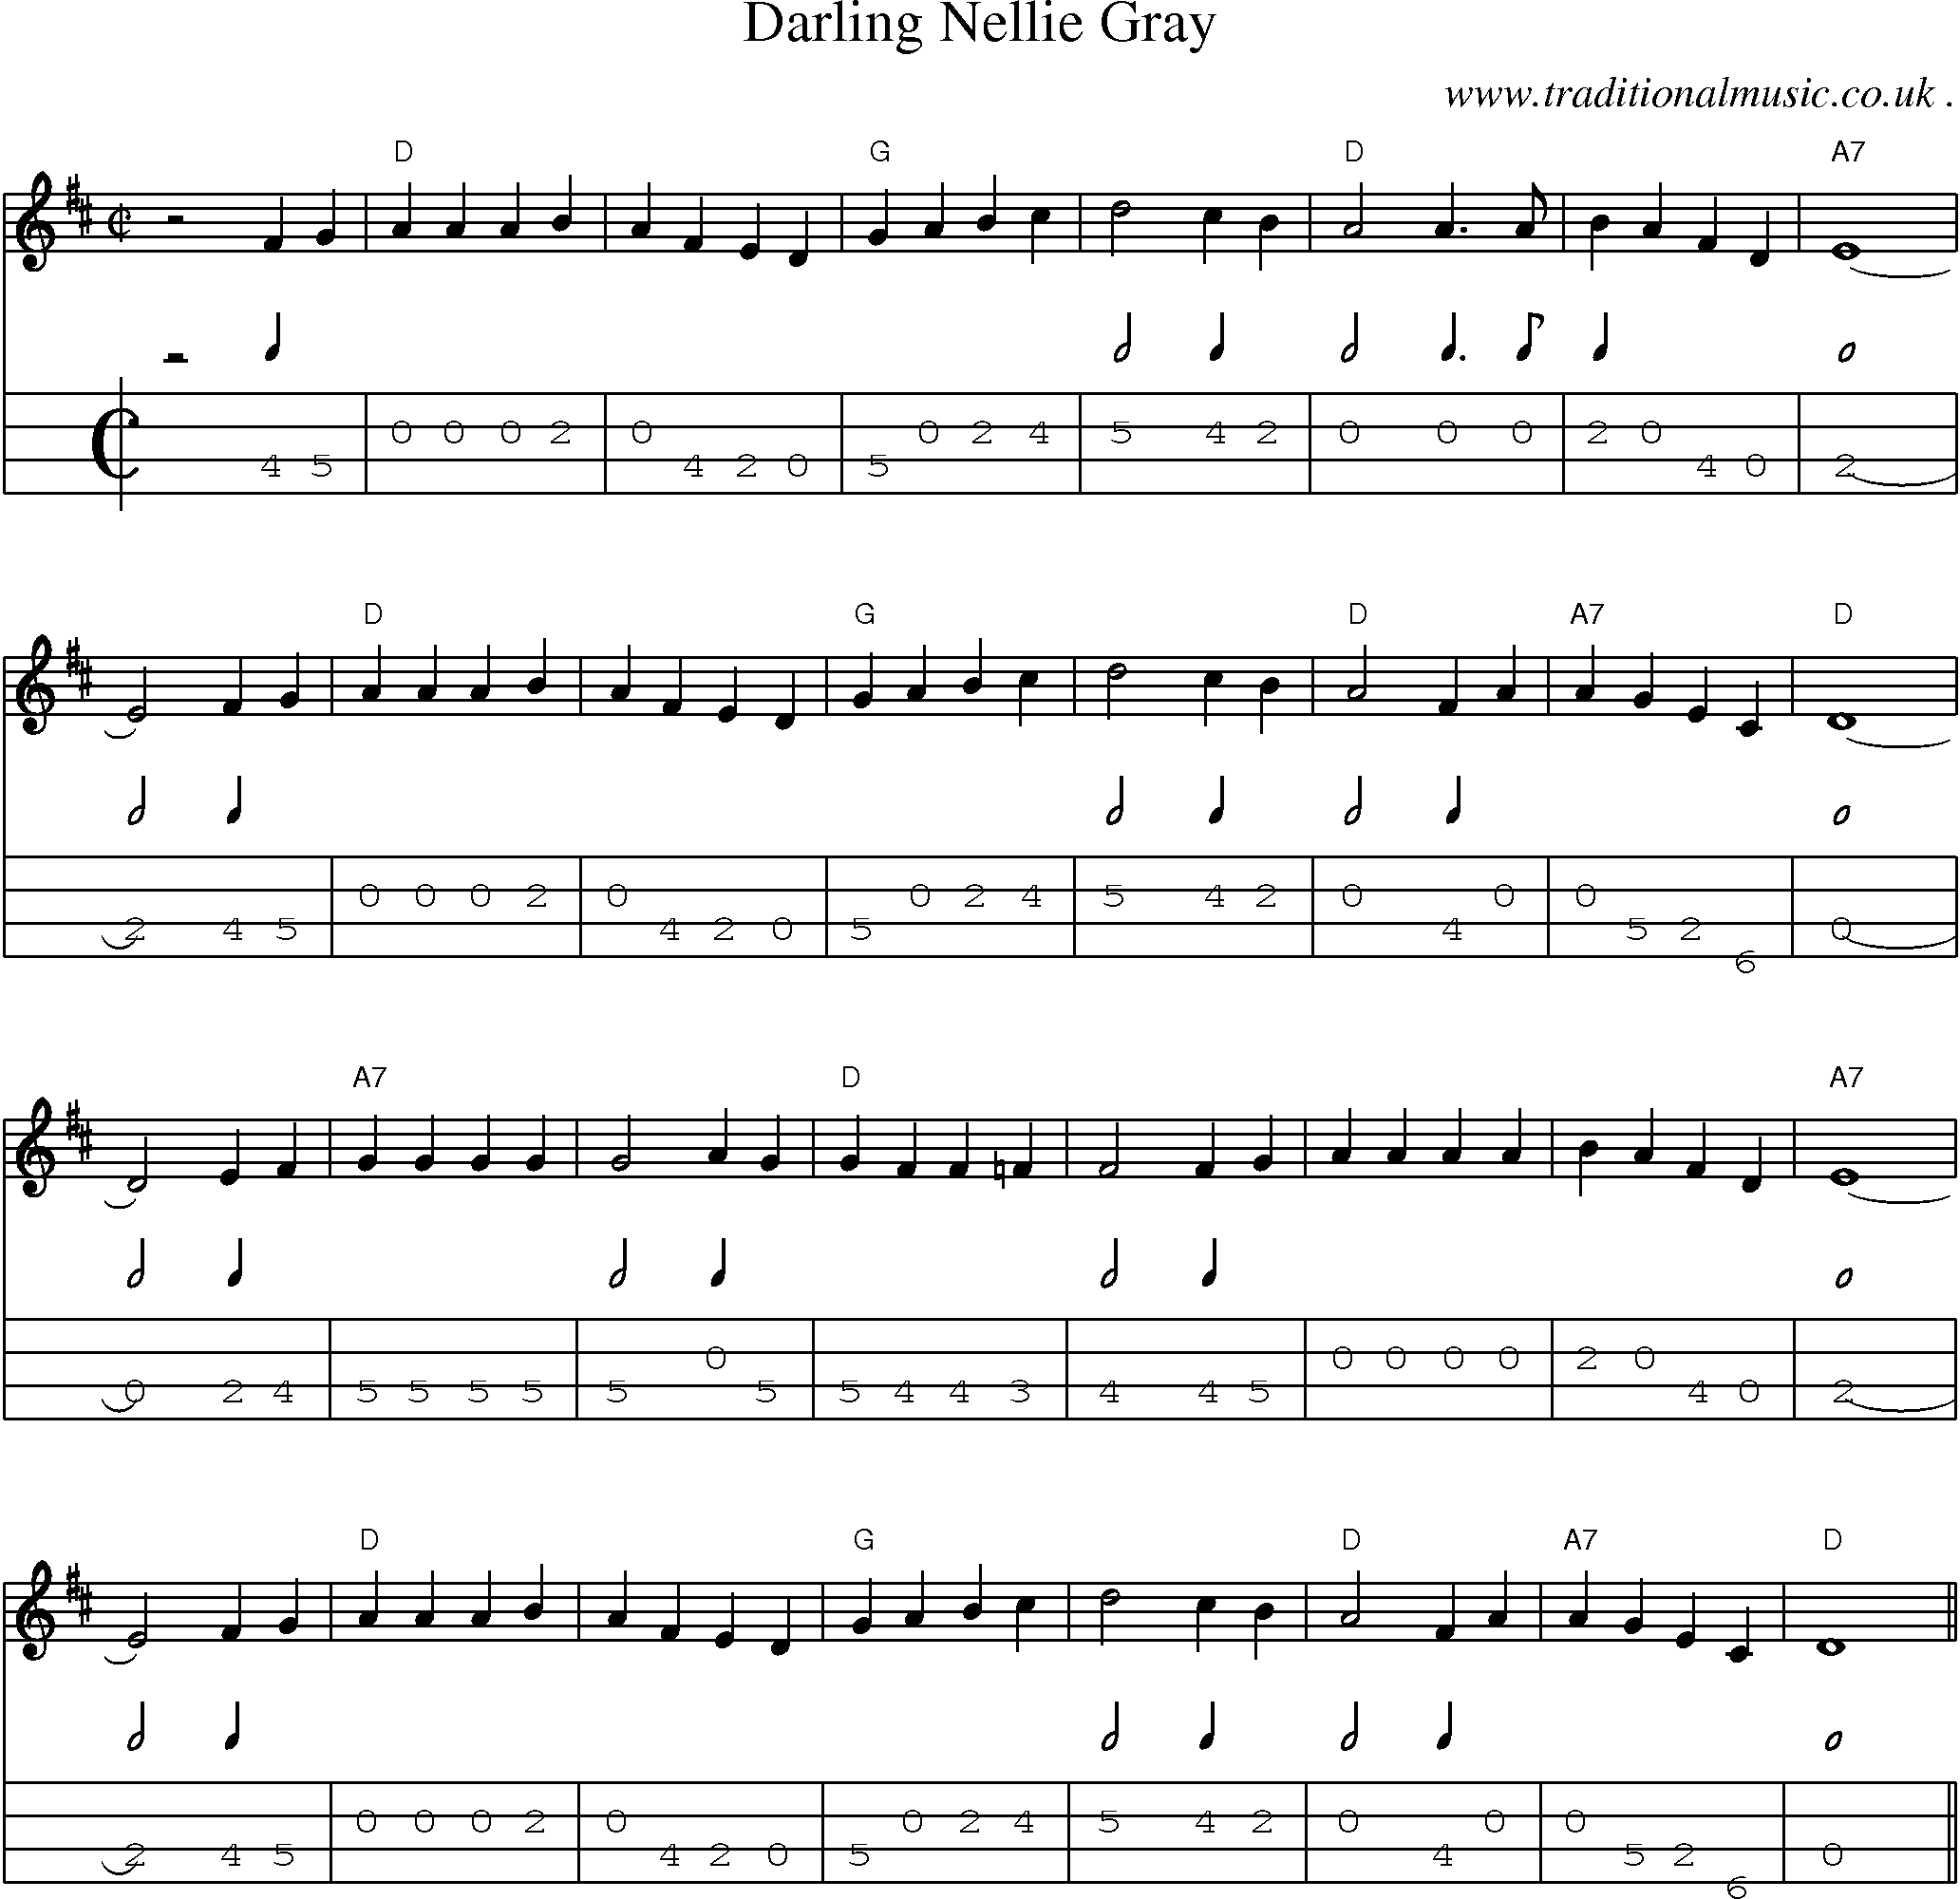 Music Score and Guitar Tabs for Darling Nellie Gray